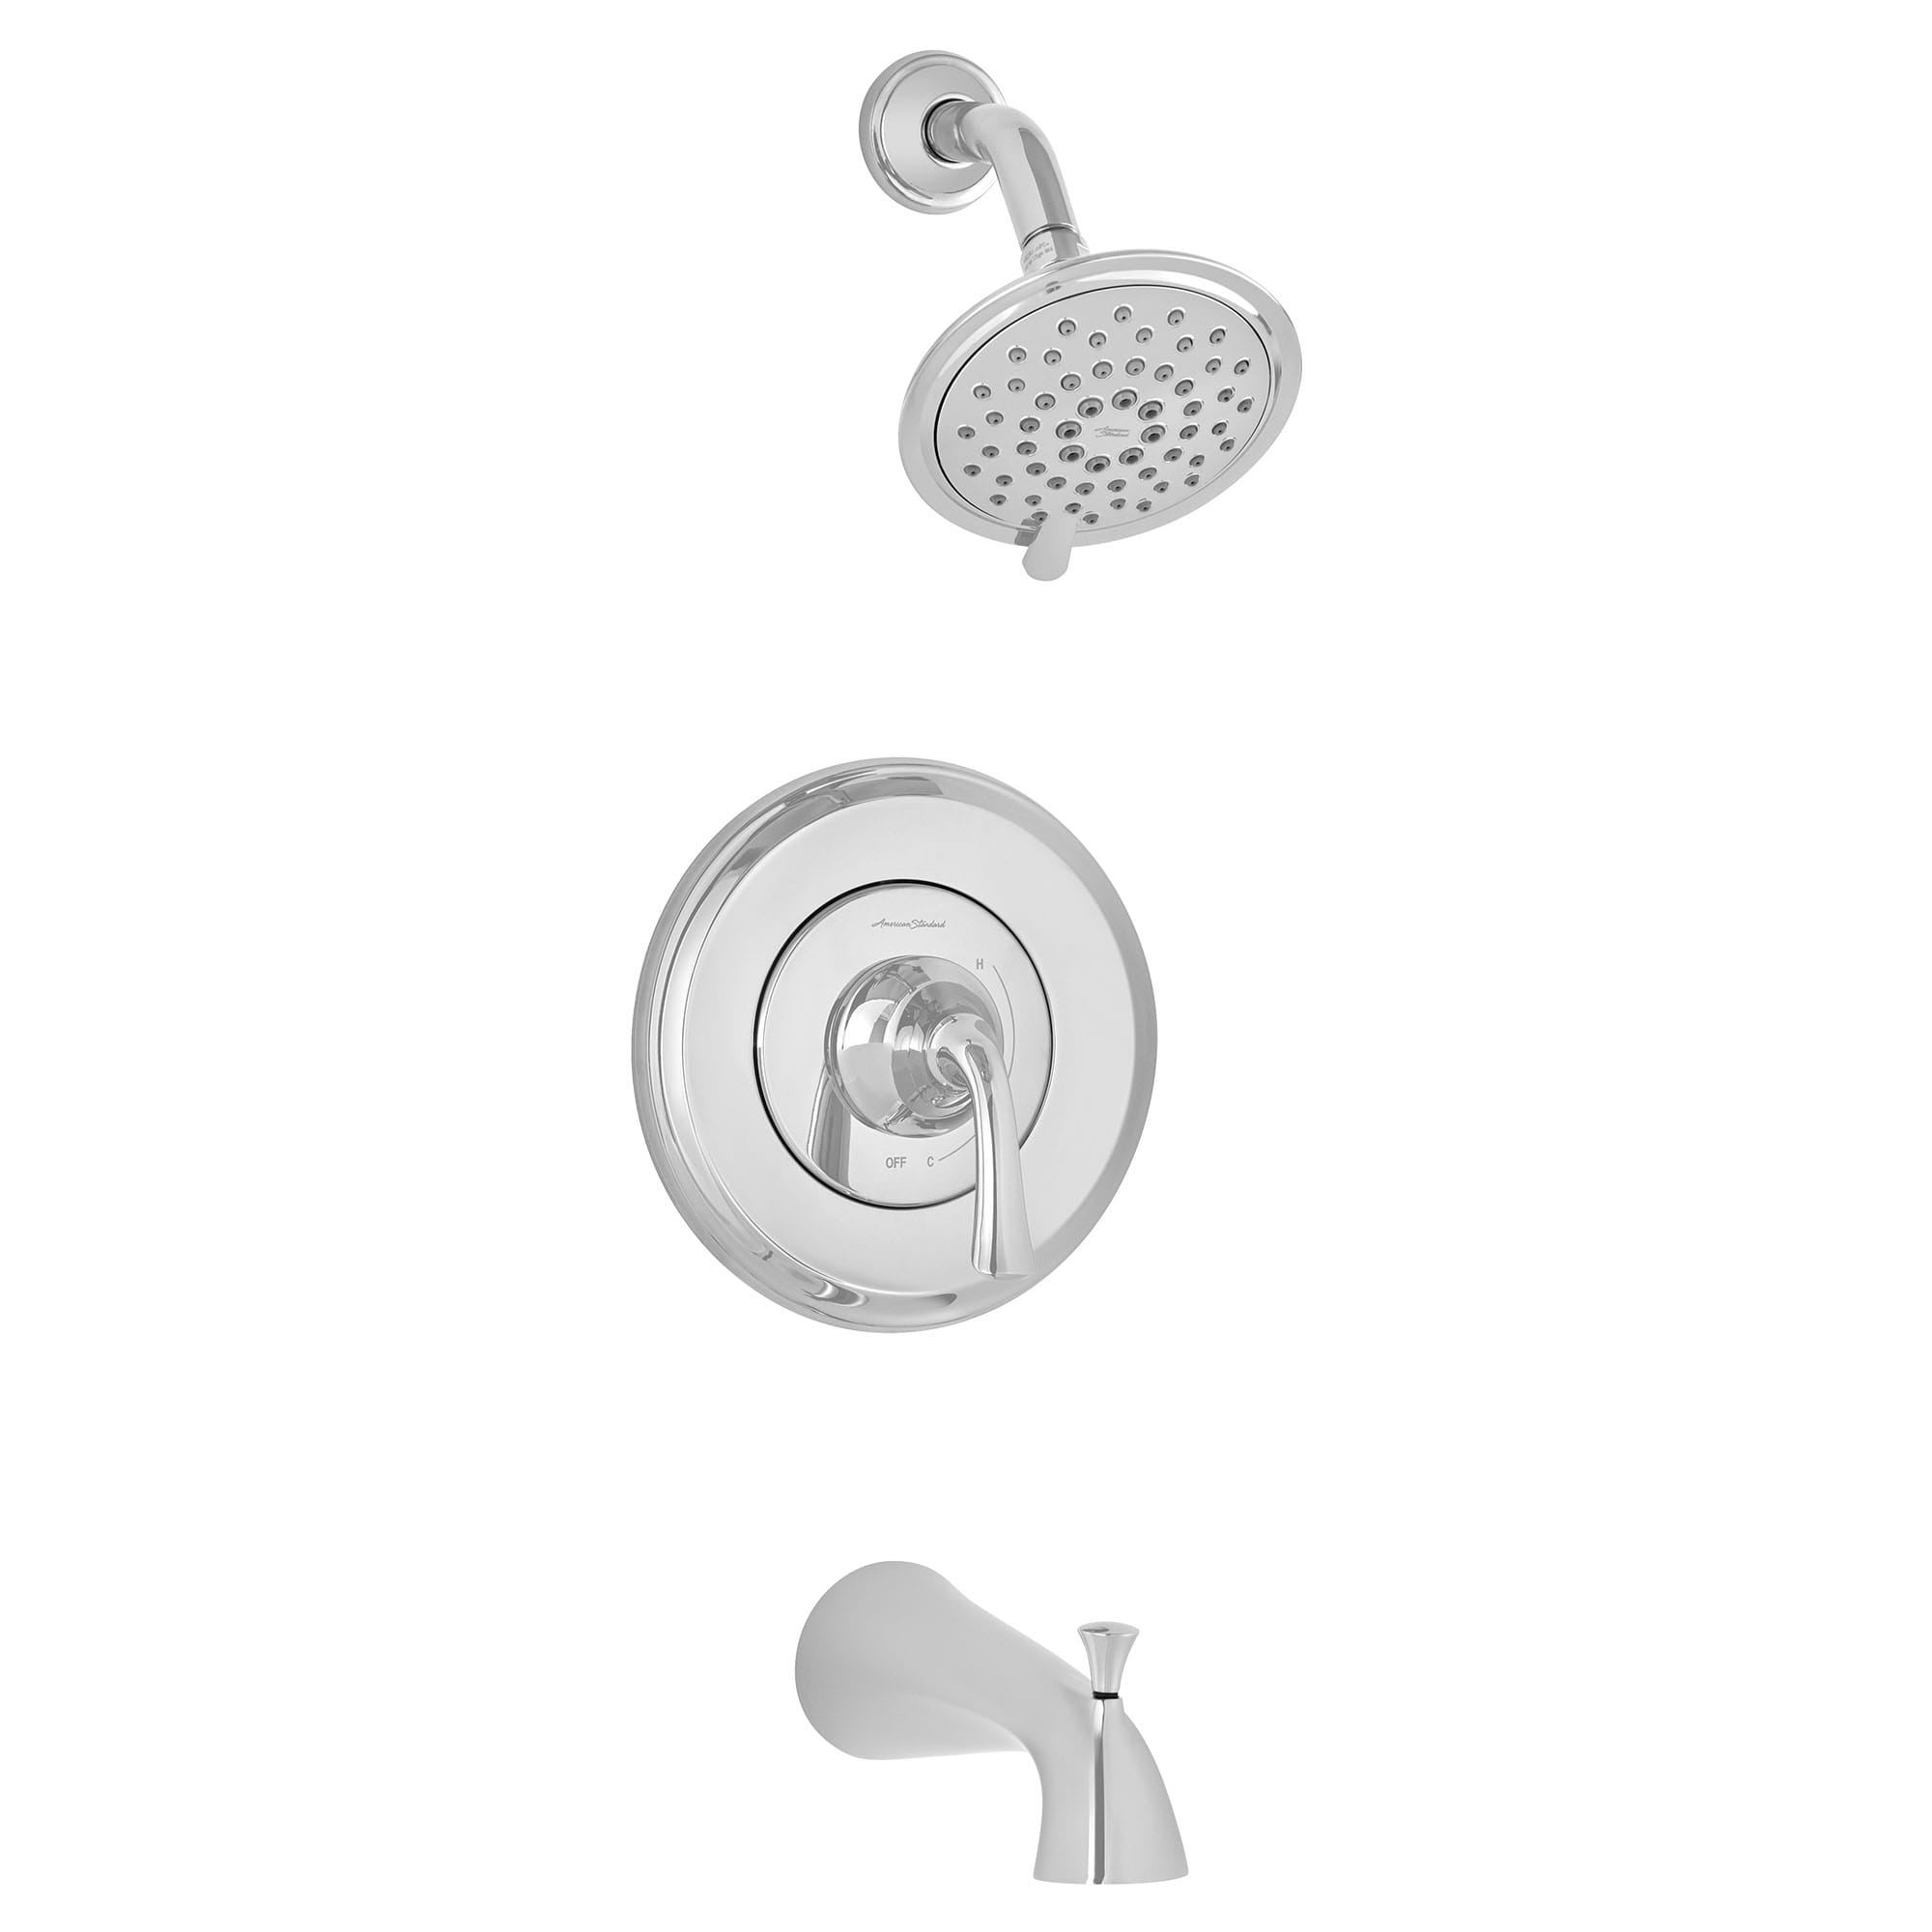 Patience 175 gpm 66 L min Tub and Shower Trim Kit With Water Saving 3 Function Showerhead Double Ceramic Pressure Balance Cartridge With Lever Handle CHROME